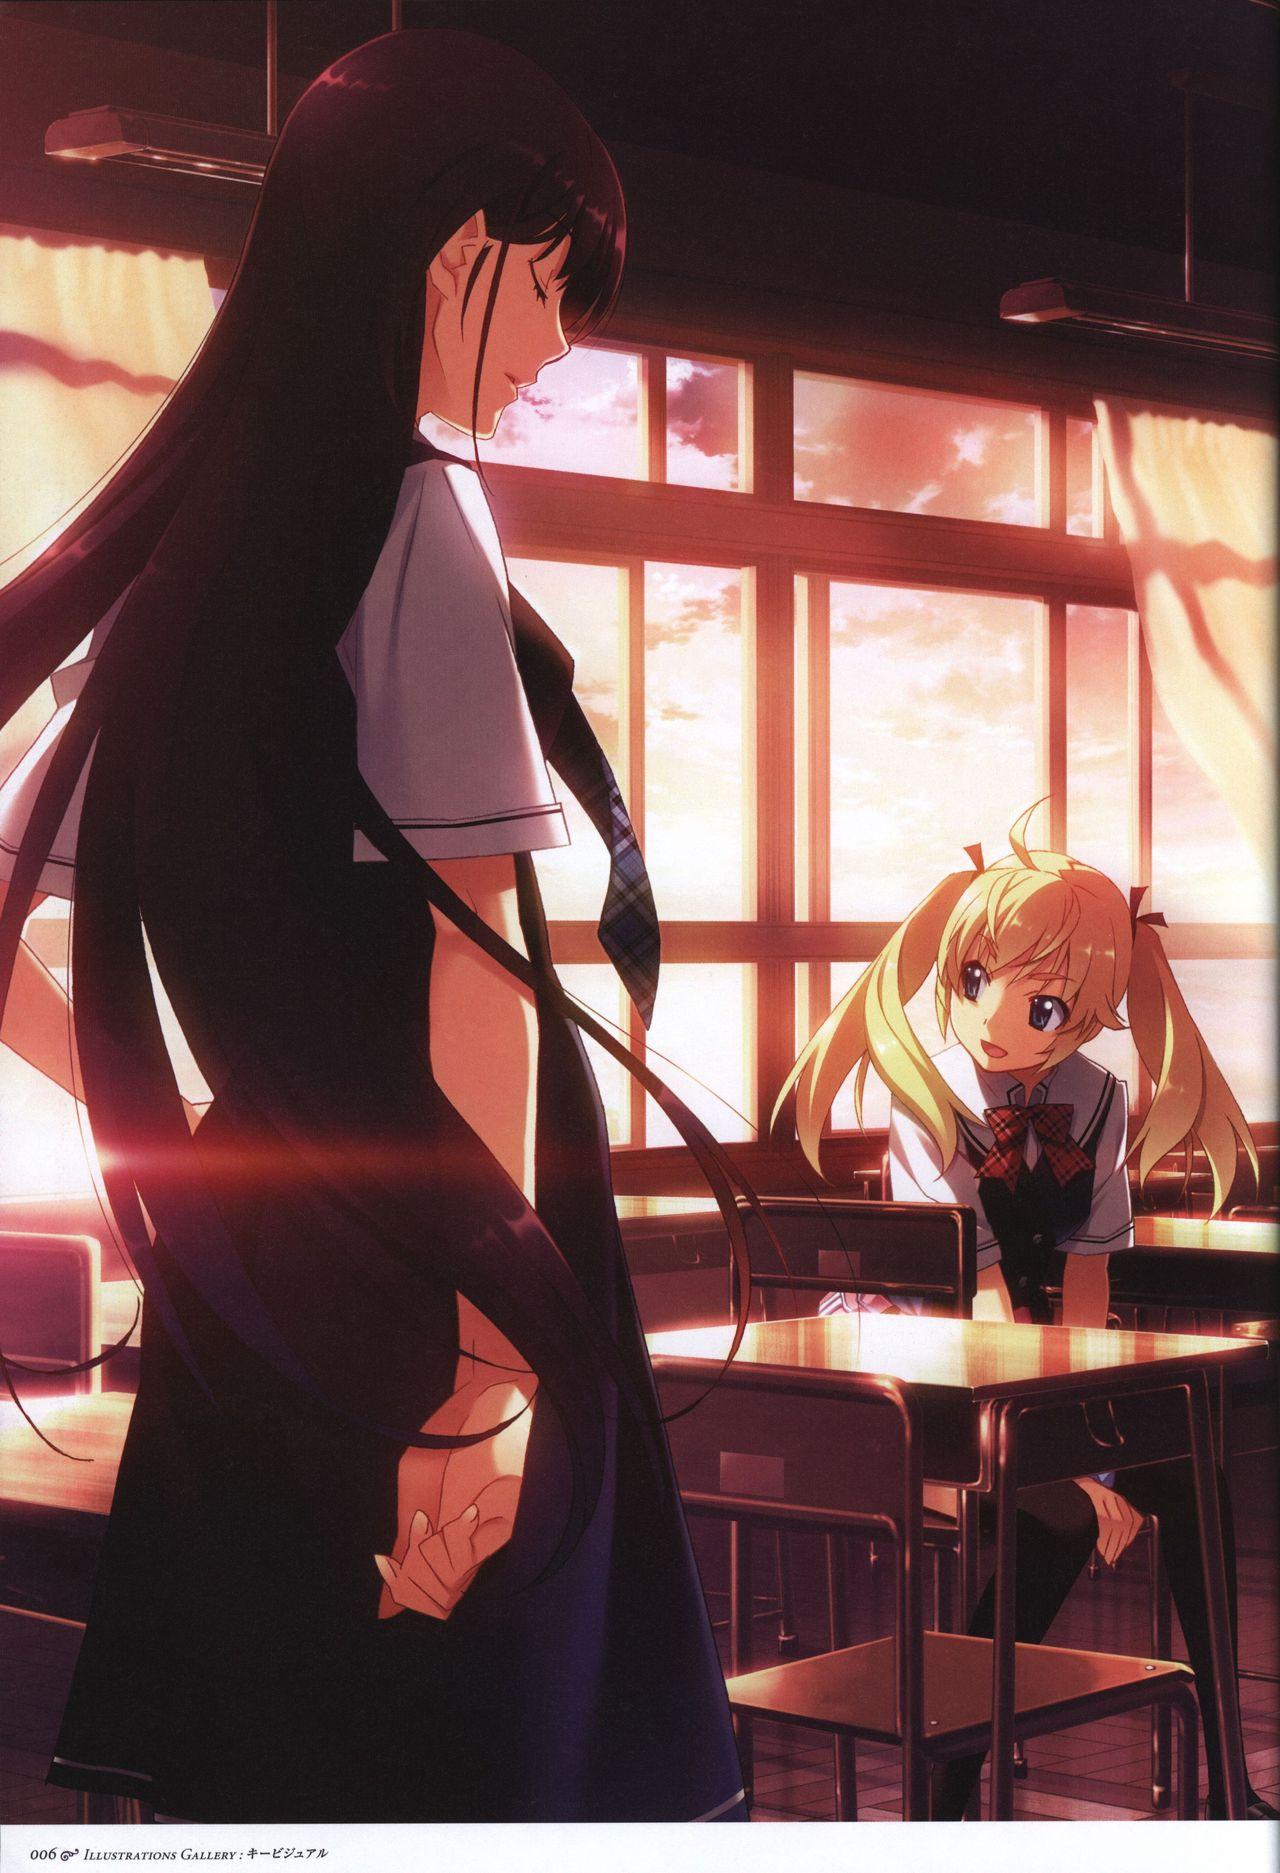 The Fruit of Grisaia Visual FanBook 6